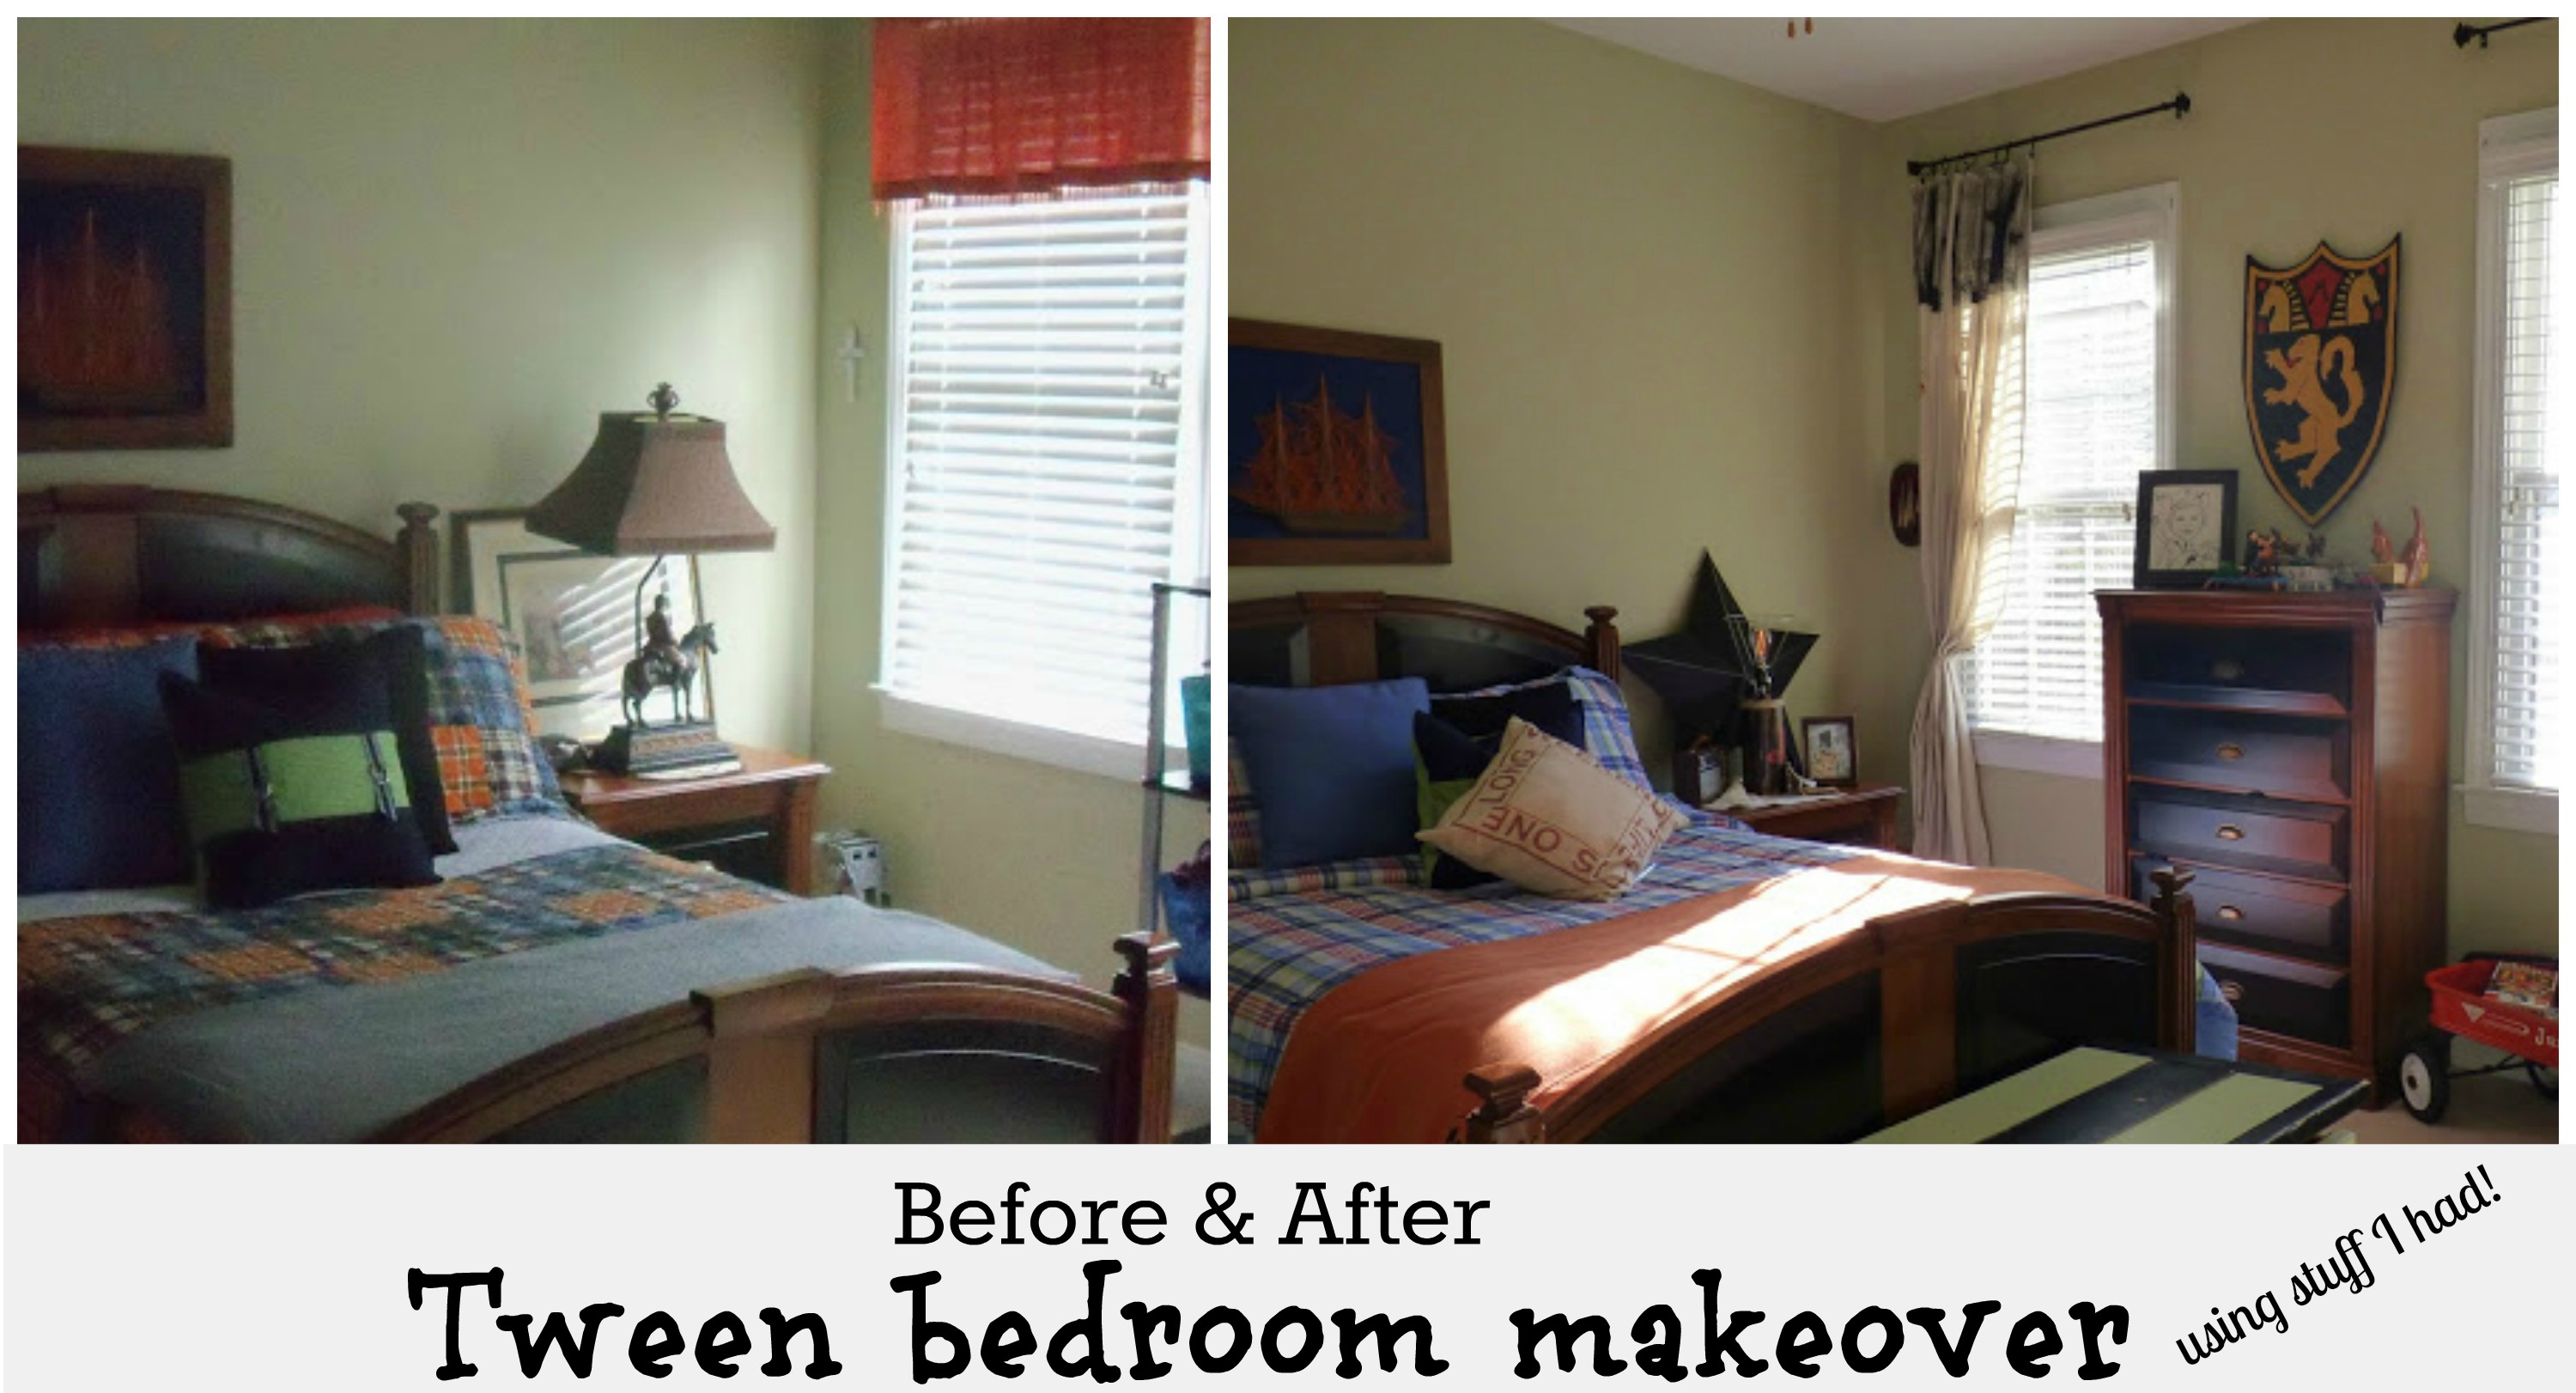 Boys bedroom before and after makeover on a budget using things I already had